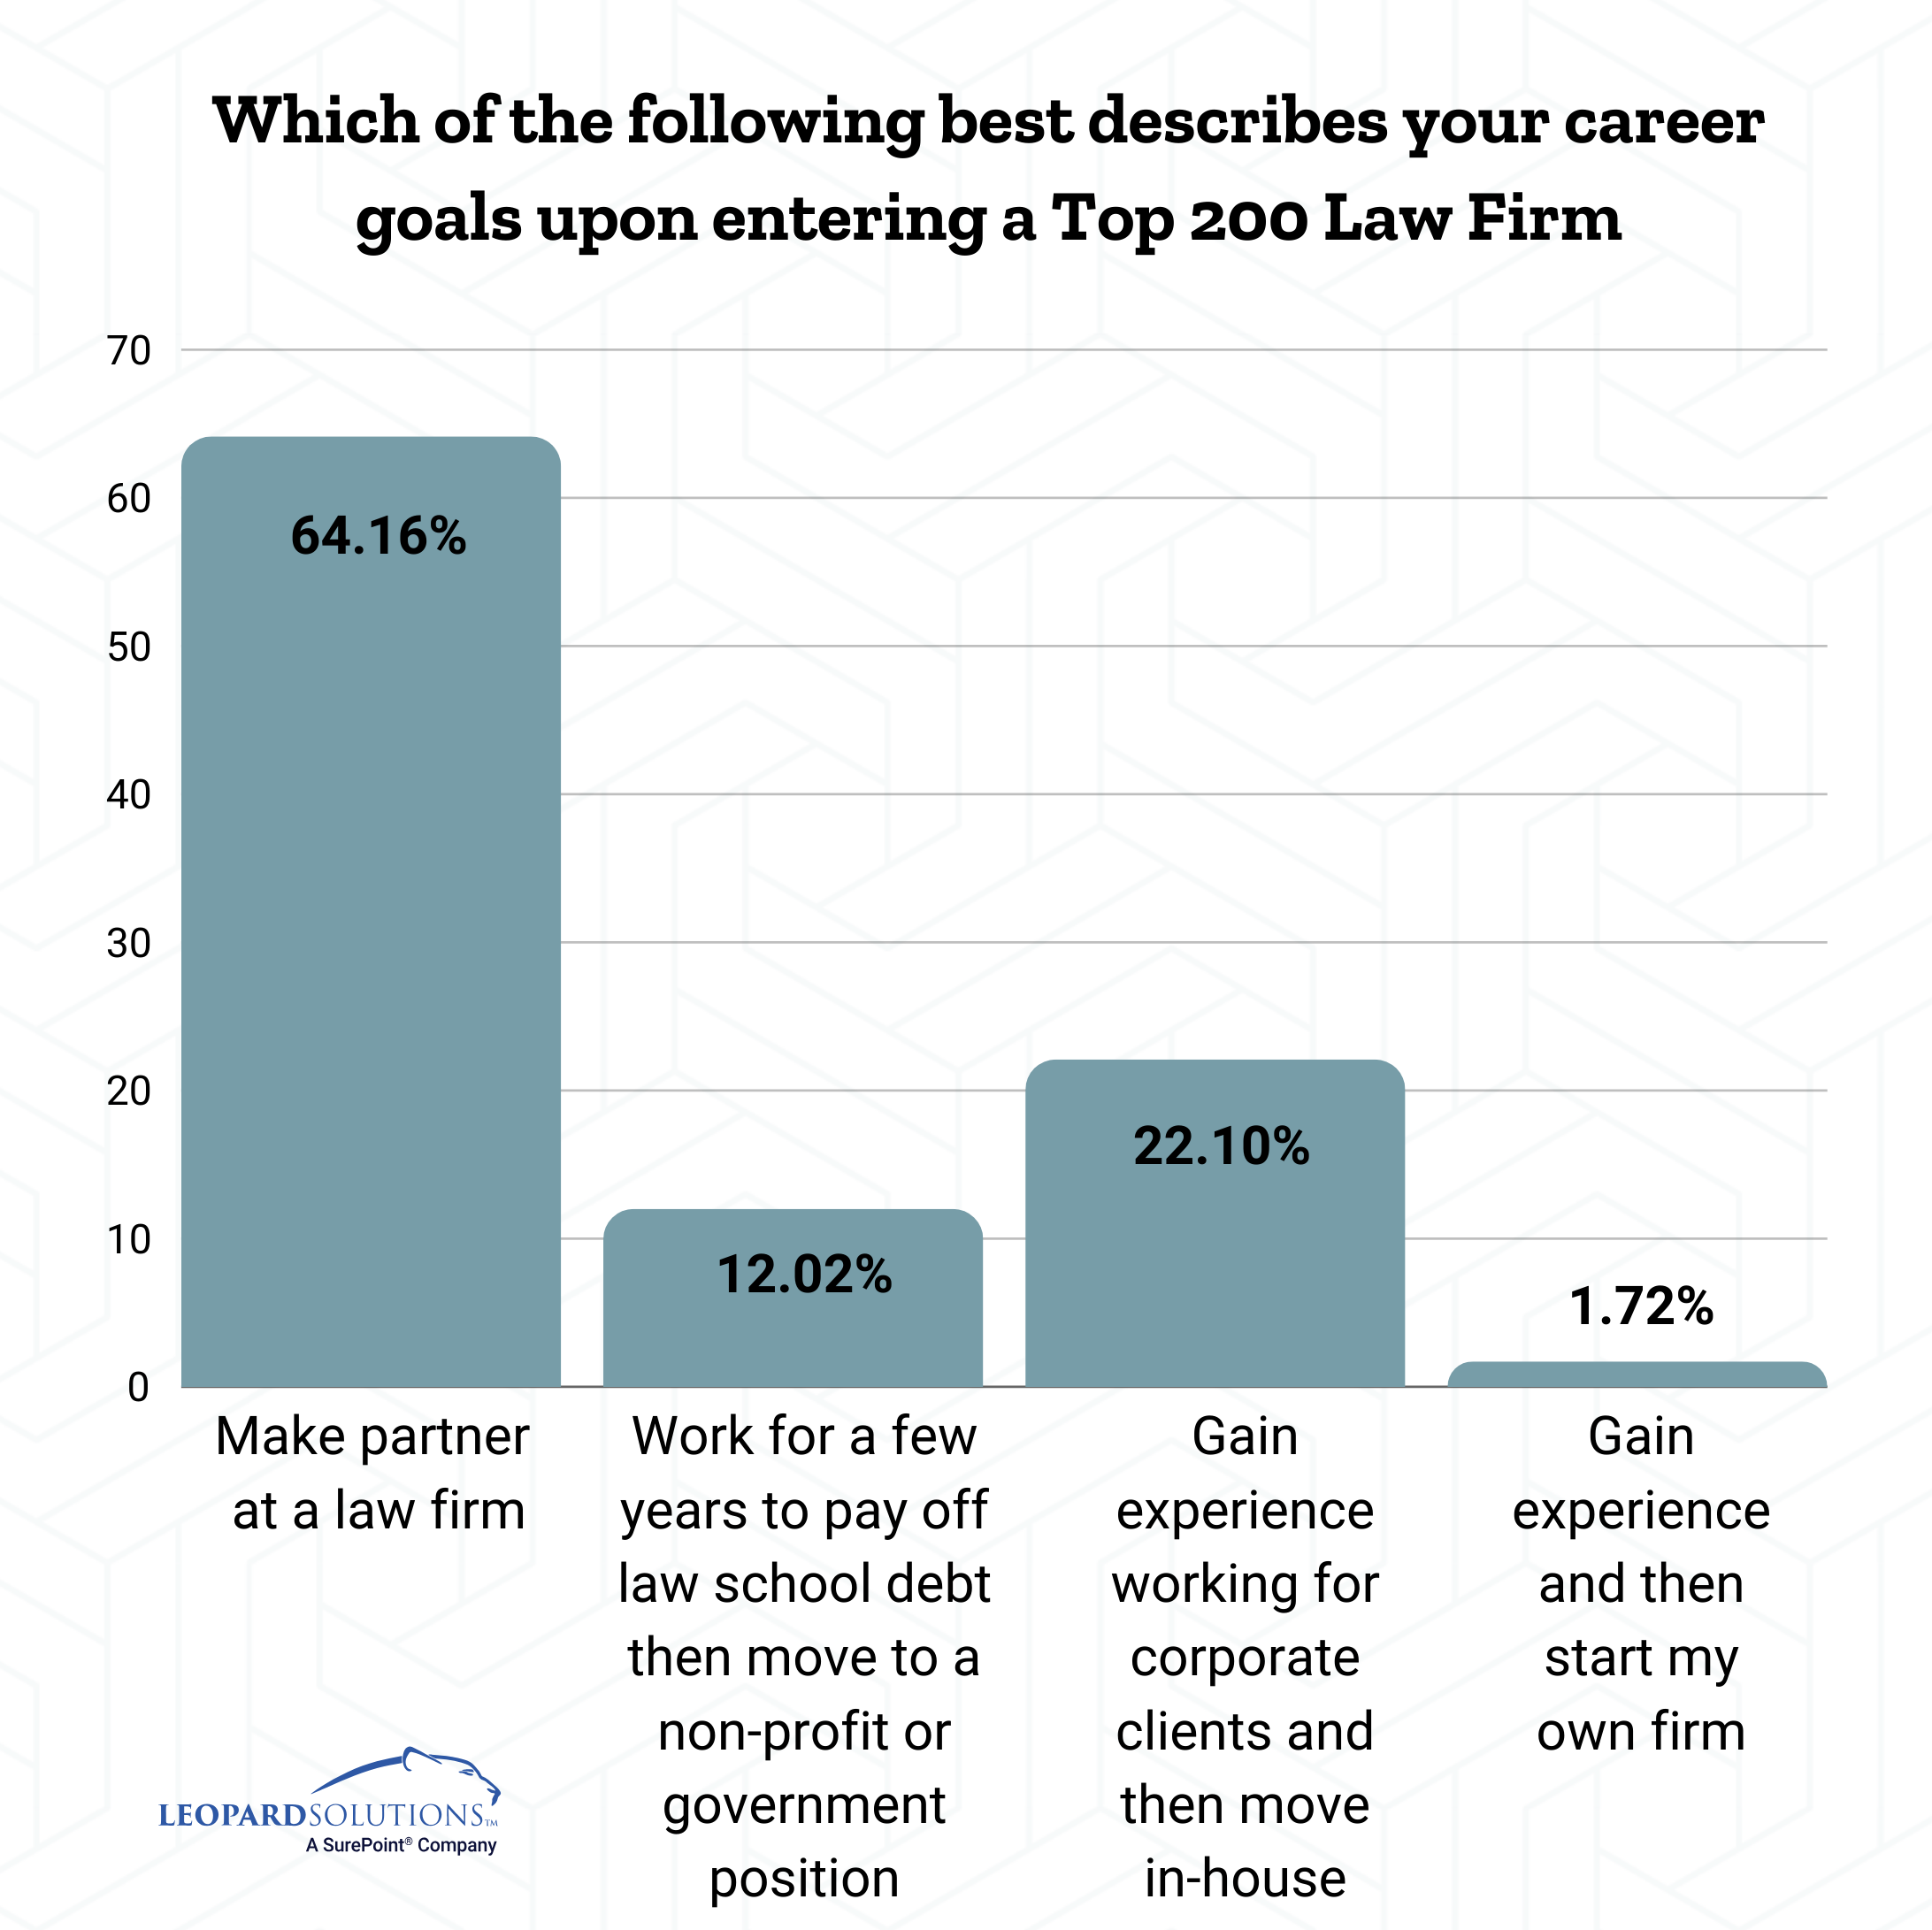 Which of the following best describes your career goals upon entering a top 200 law firm